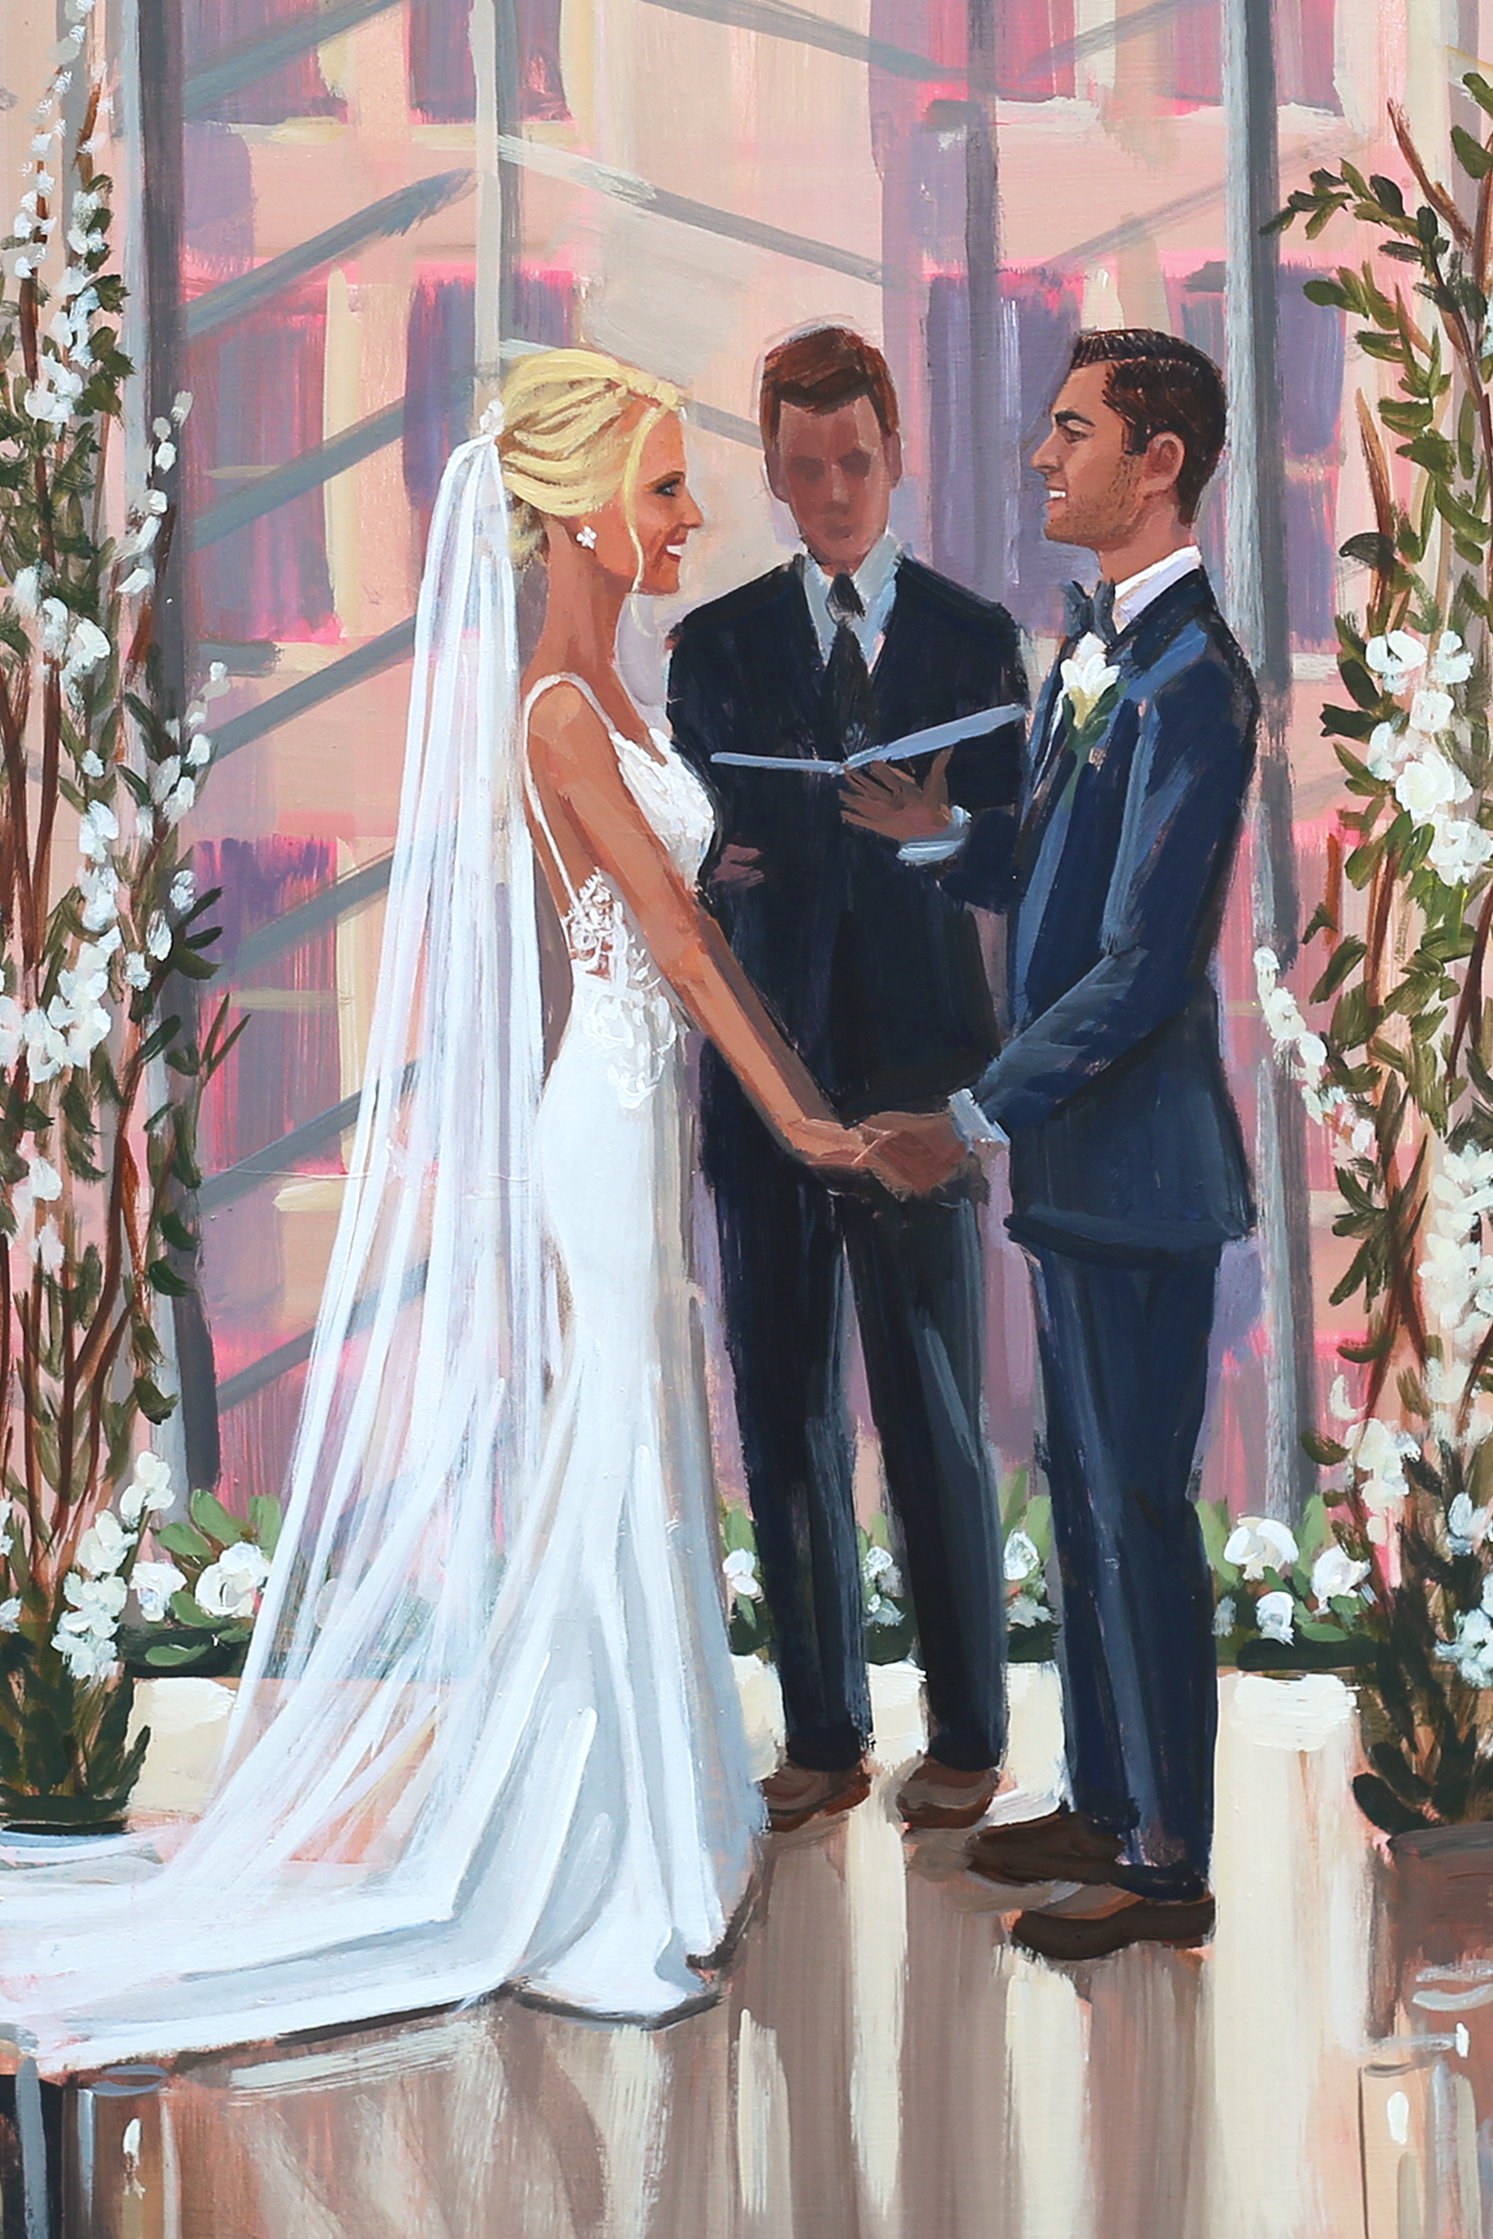 Close up of Erika + Matt’s live wedding painting that was created during their ceremony at Philadelphia’s Kimmel Center.